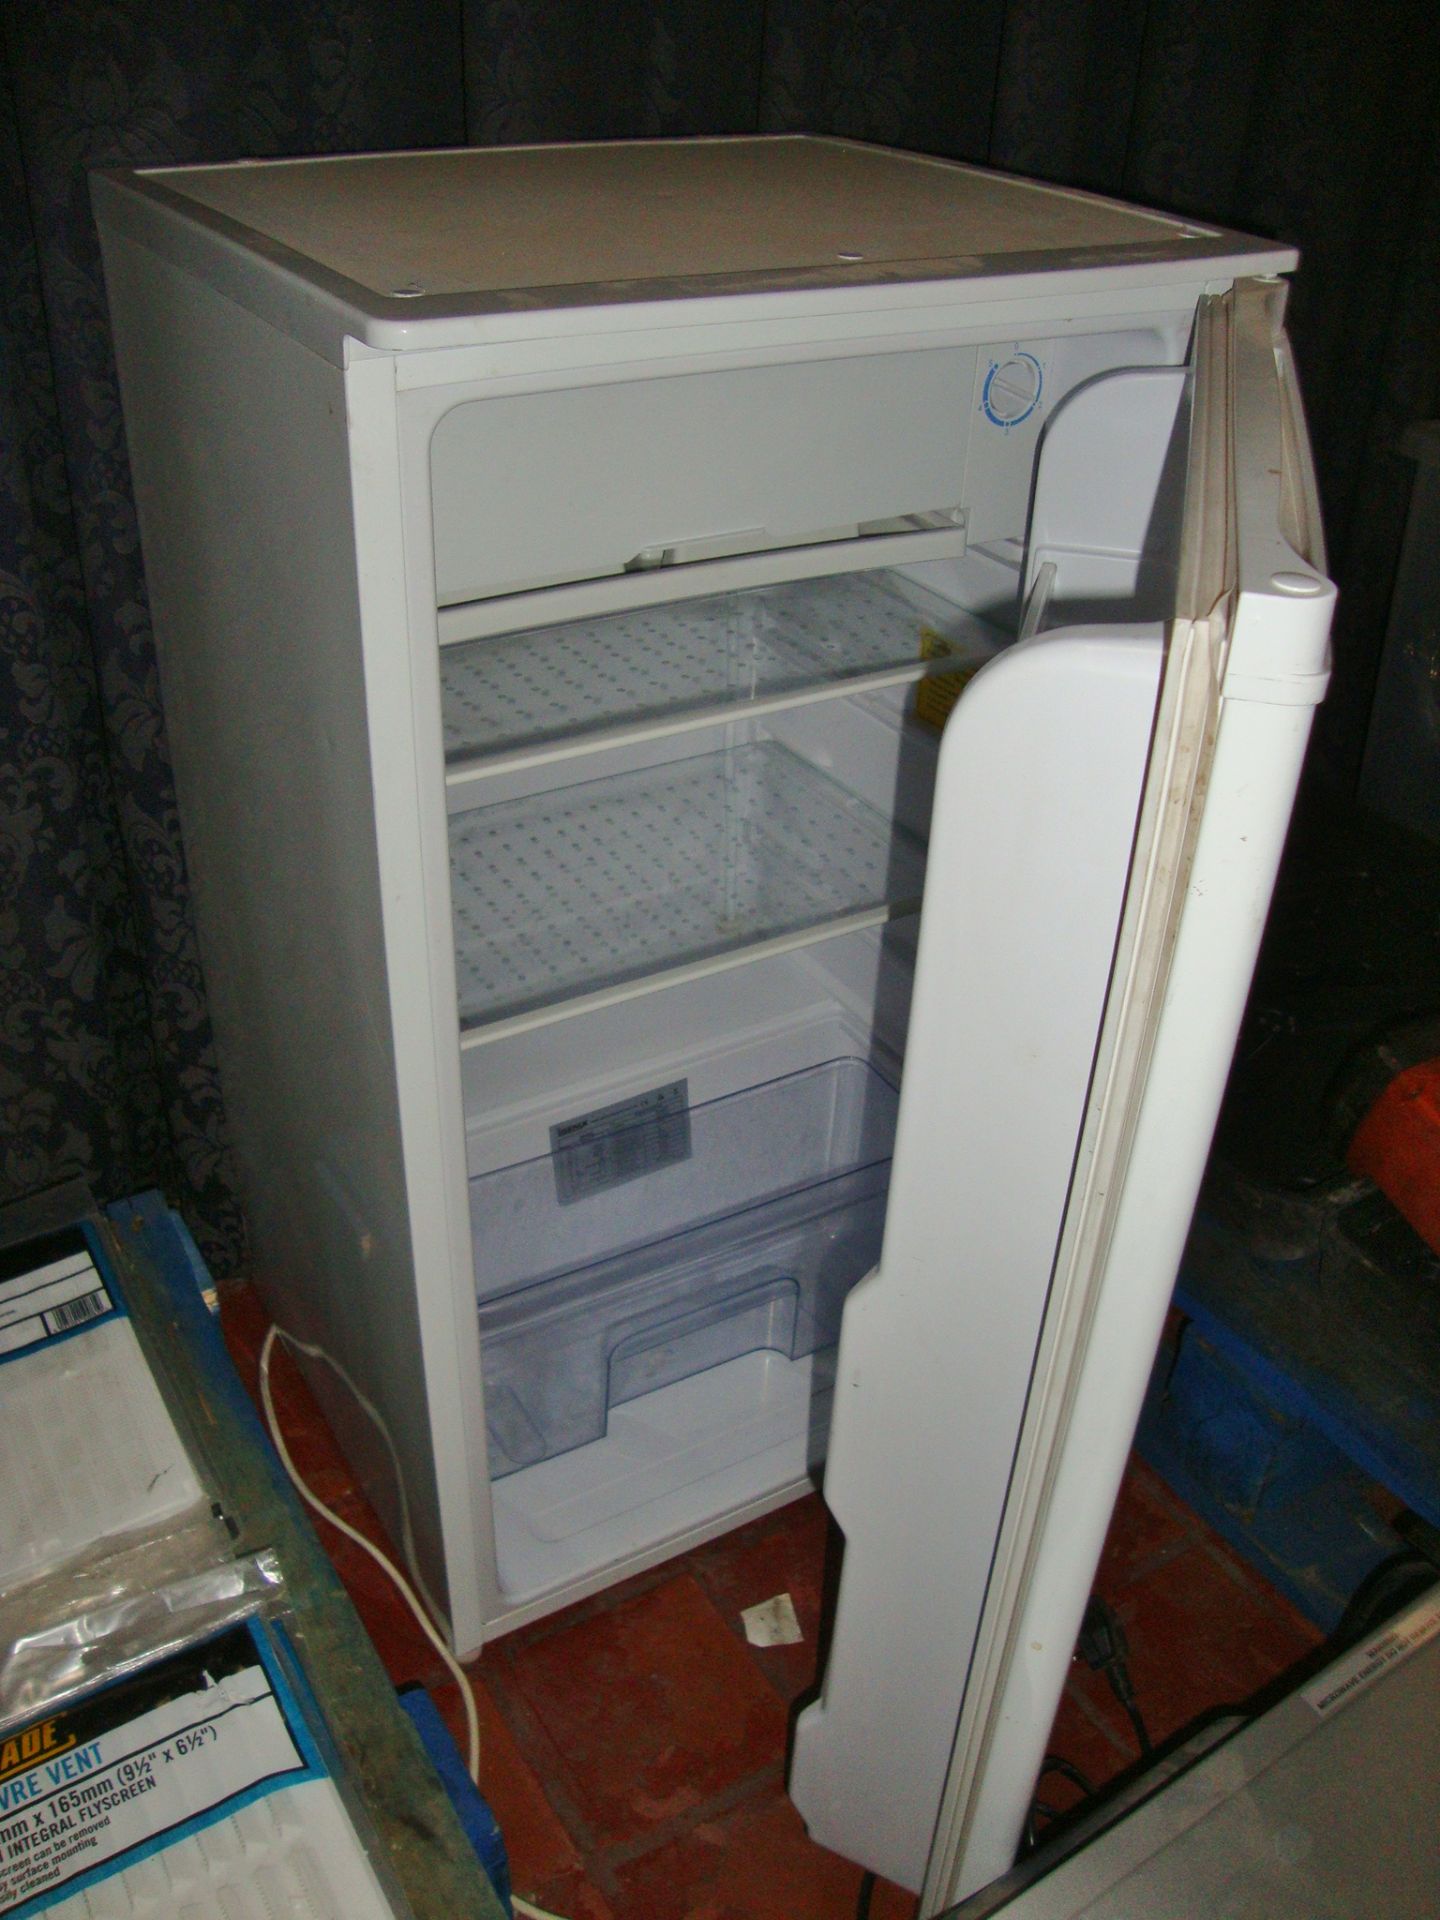 Igenix domestic counter height fridge with small freezer compartment - Image 2 of 2